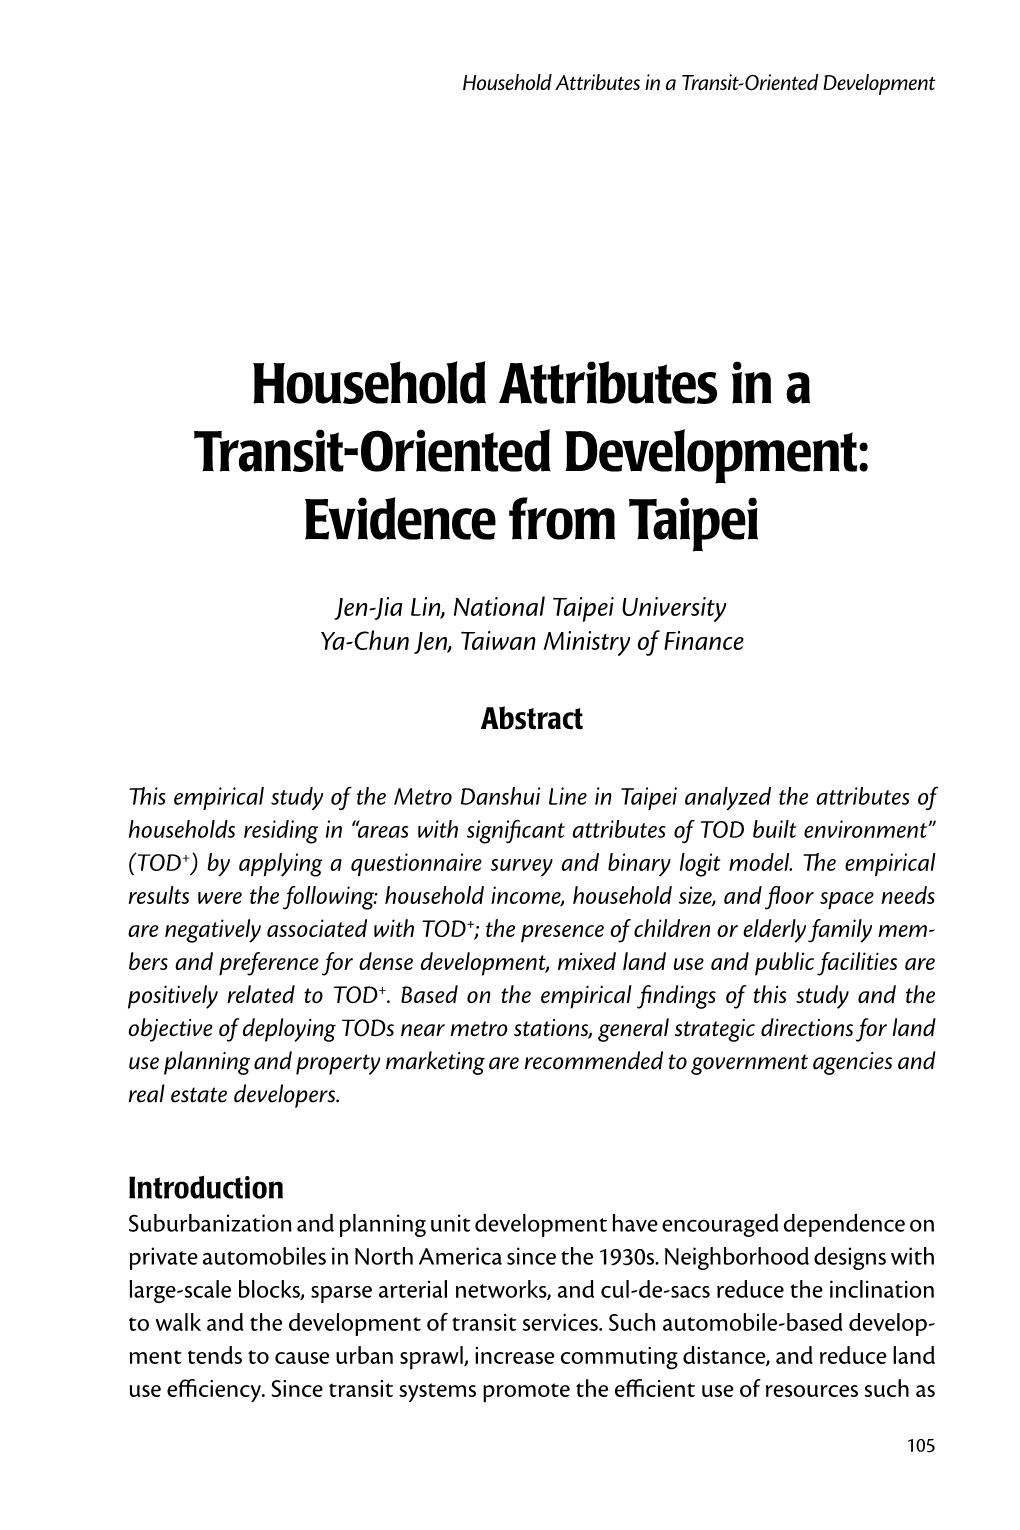 Household Attributes in a Transit-Oriented Development